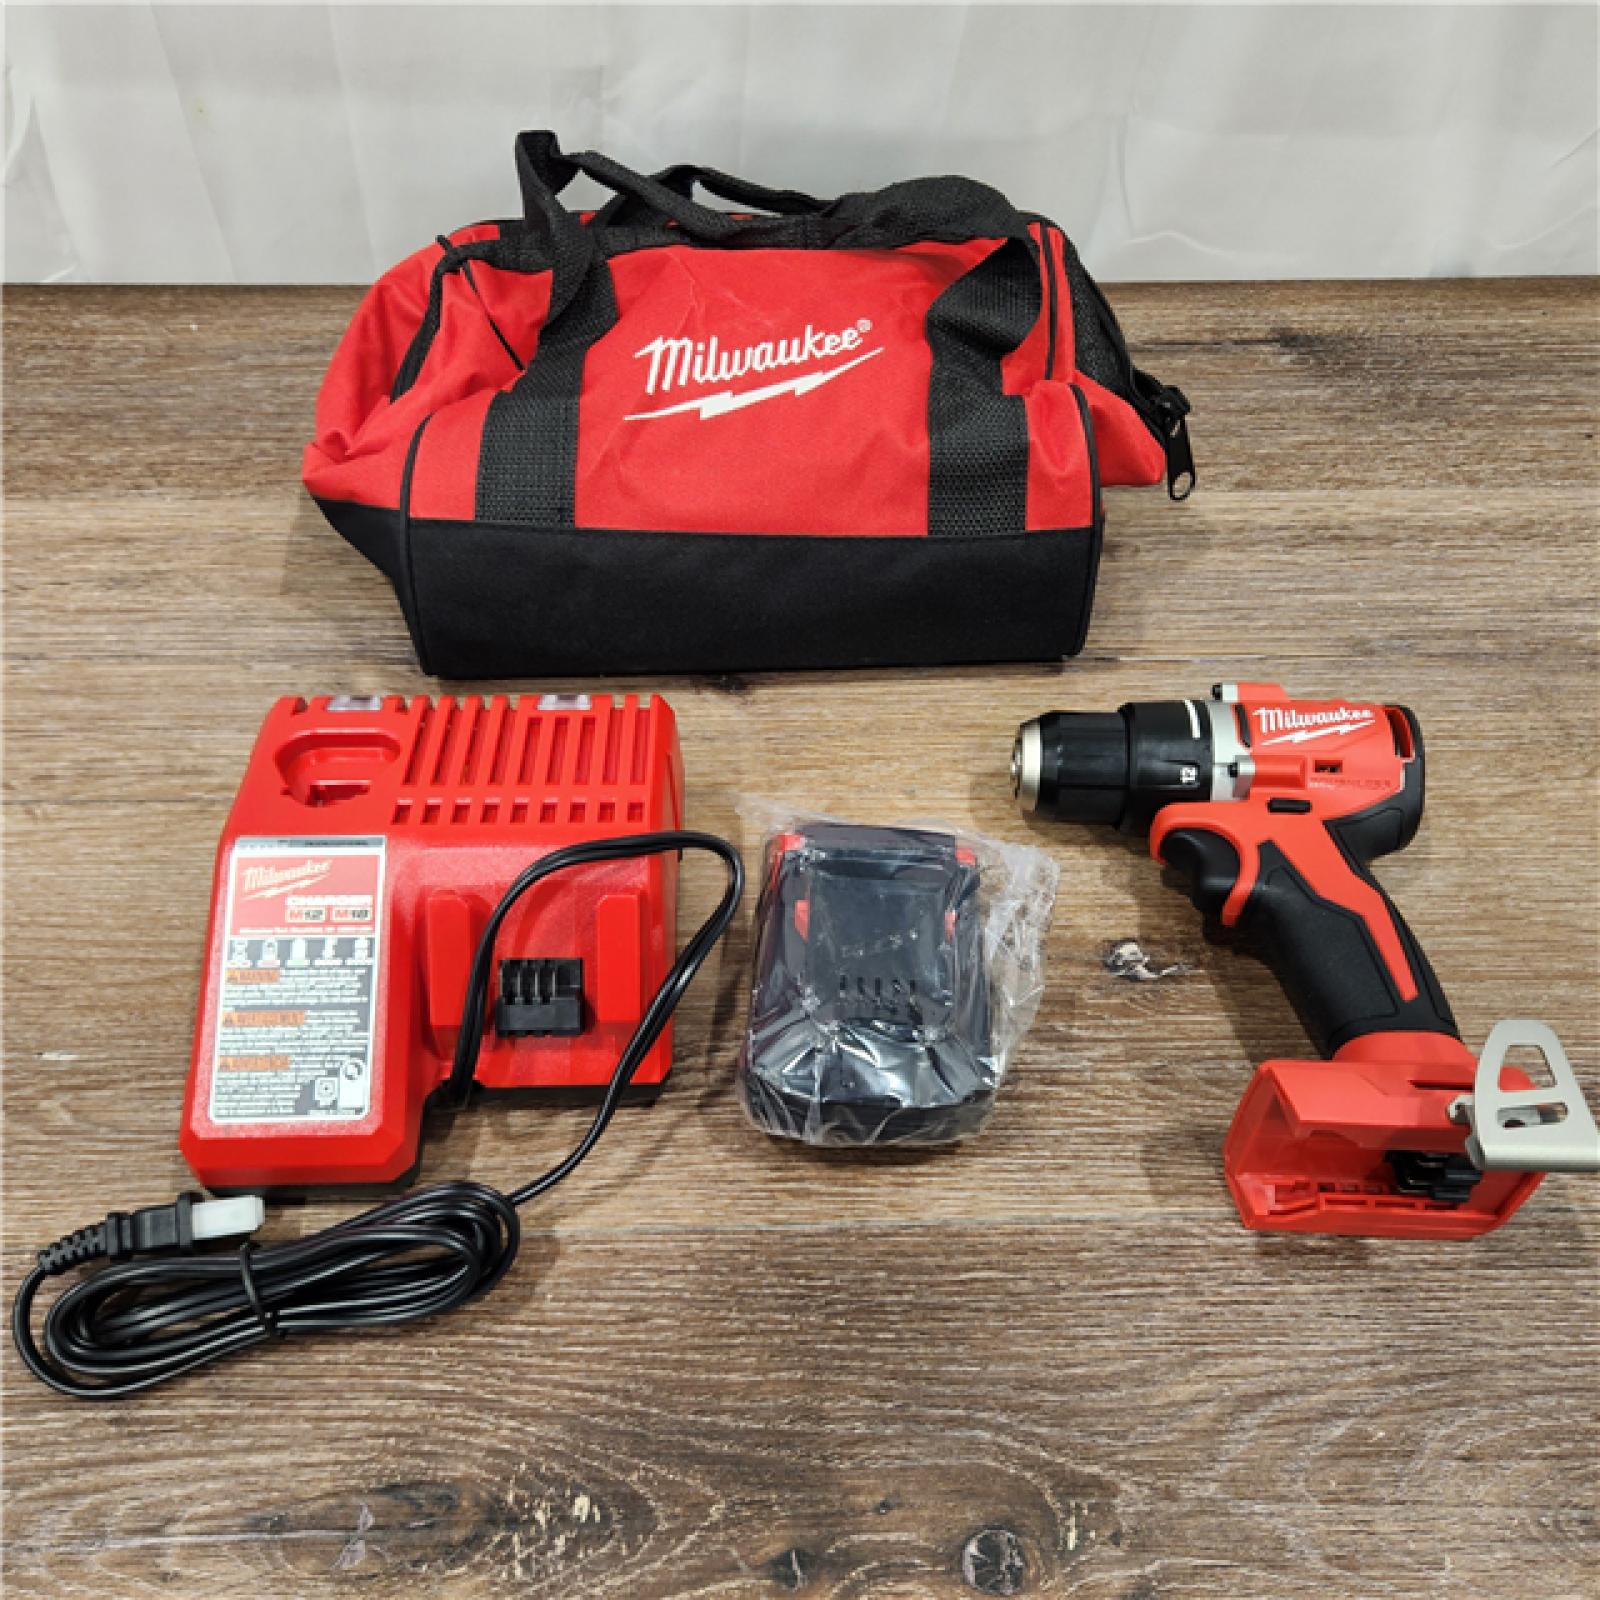 NEW! Milwaukee M18 Compact 1/2 in. Brushless Cordless Drill/Driver Kit (Battery & Charger)